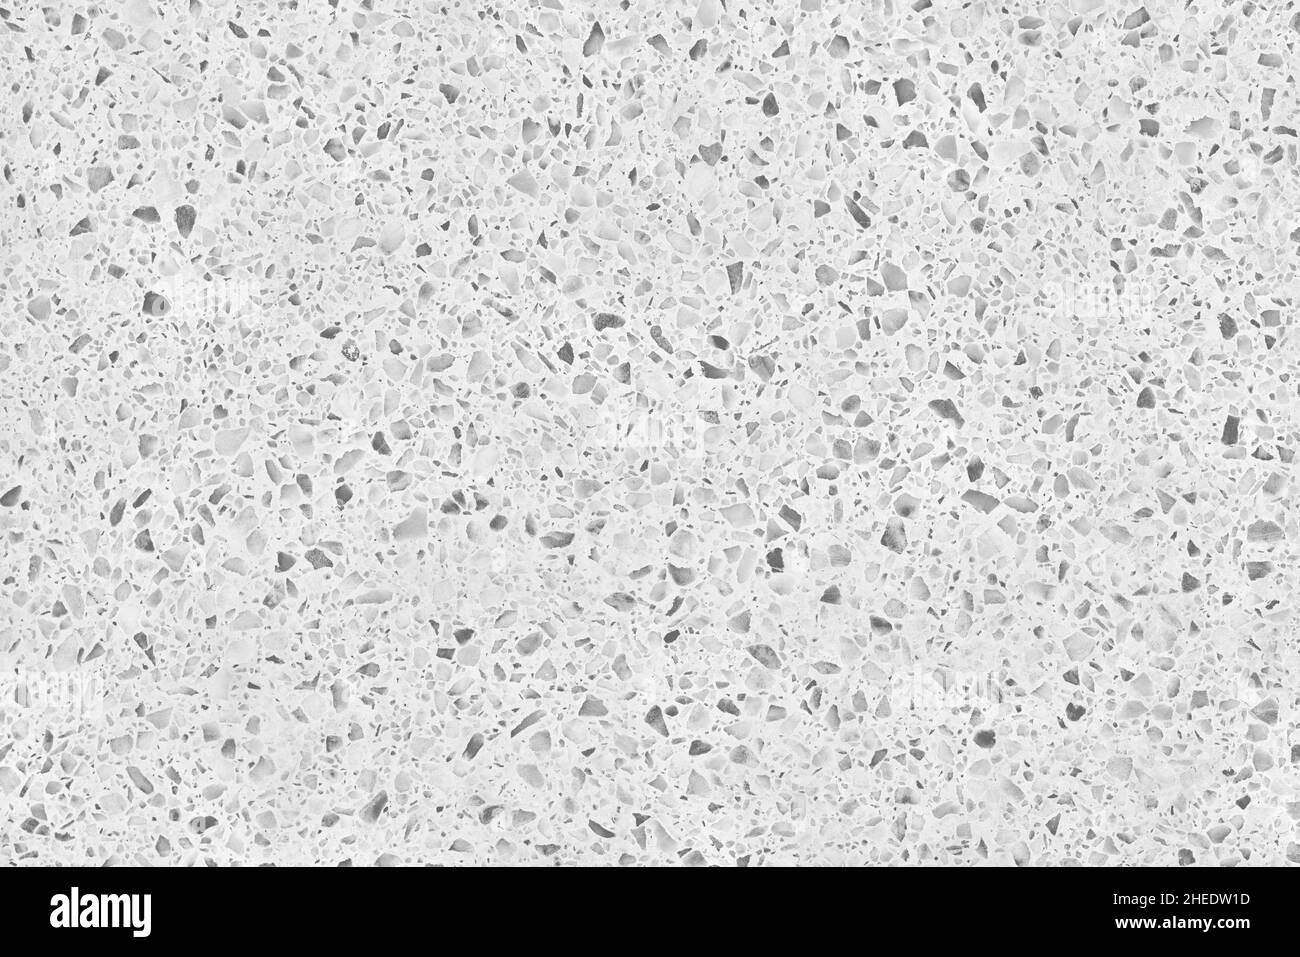 Quartz and plaster white texture for external architectural surfaces Stock Photo